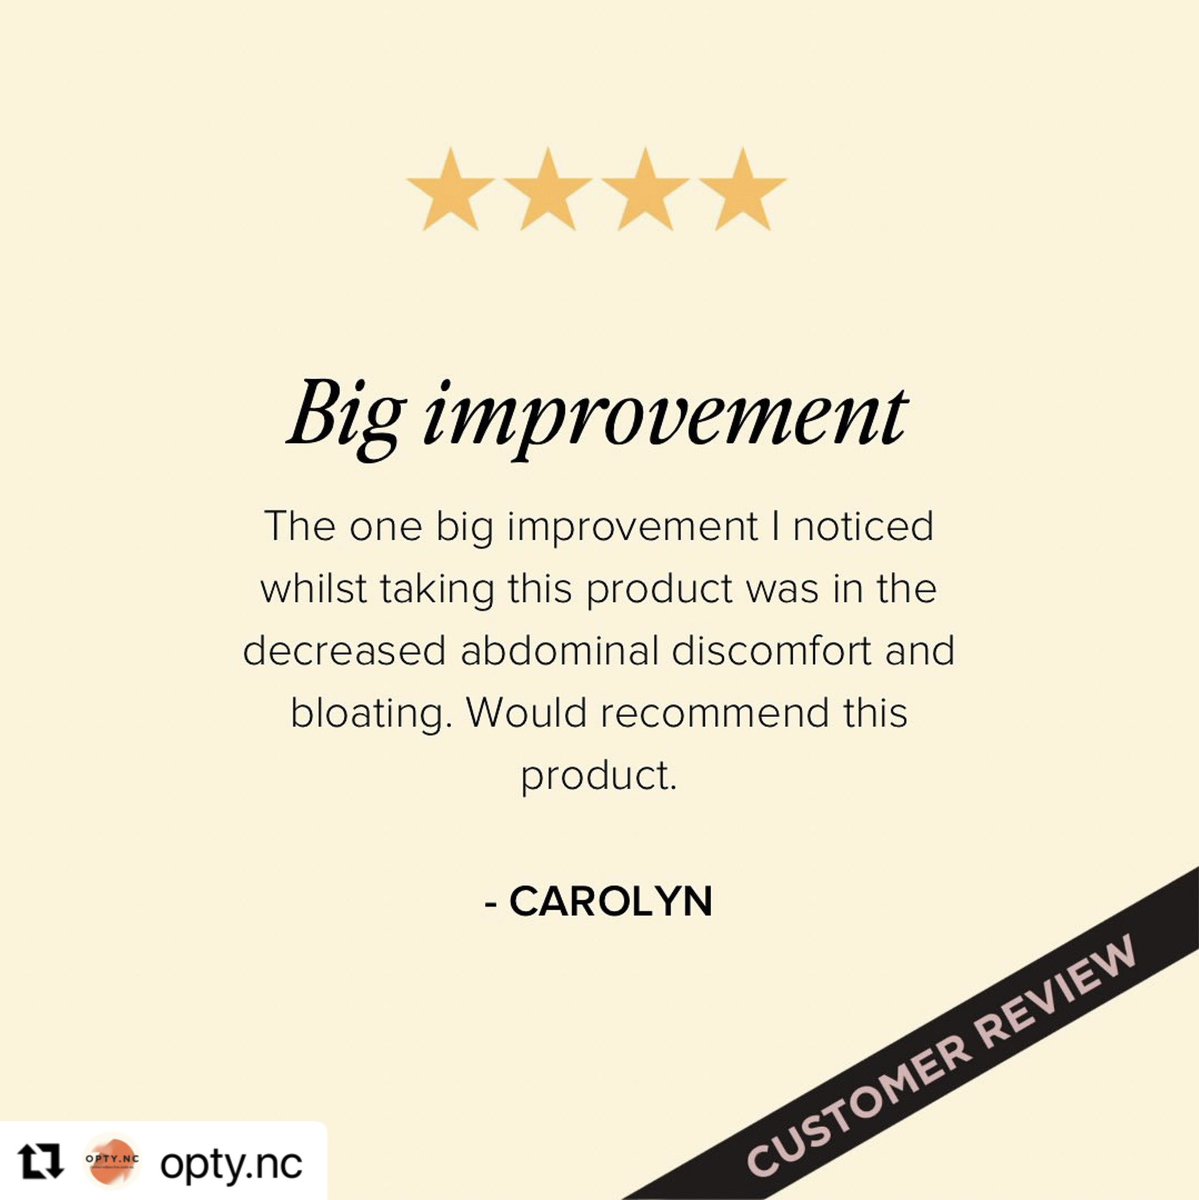 Our customers have seen real results from our Ultimate 3.0 elixir, experienced improvements to their digestion and gut health, glowing skin, and enjoyed the great taste too. 

#optync #RealResults #GutHealth #GoodSkin #glowingskin #digestionsupport #customerreview